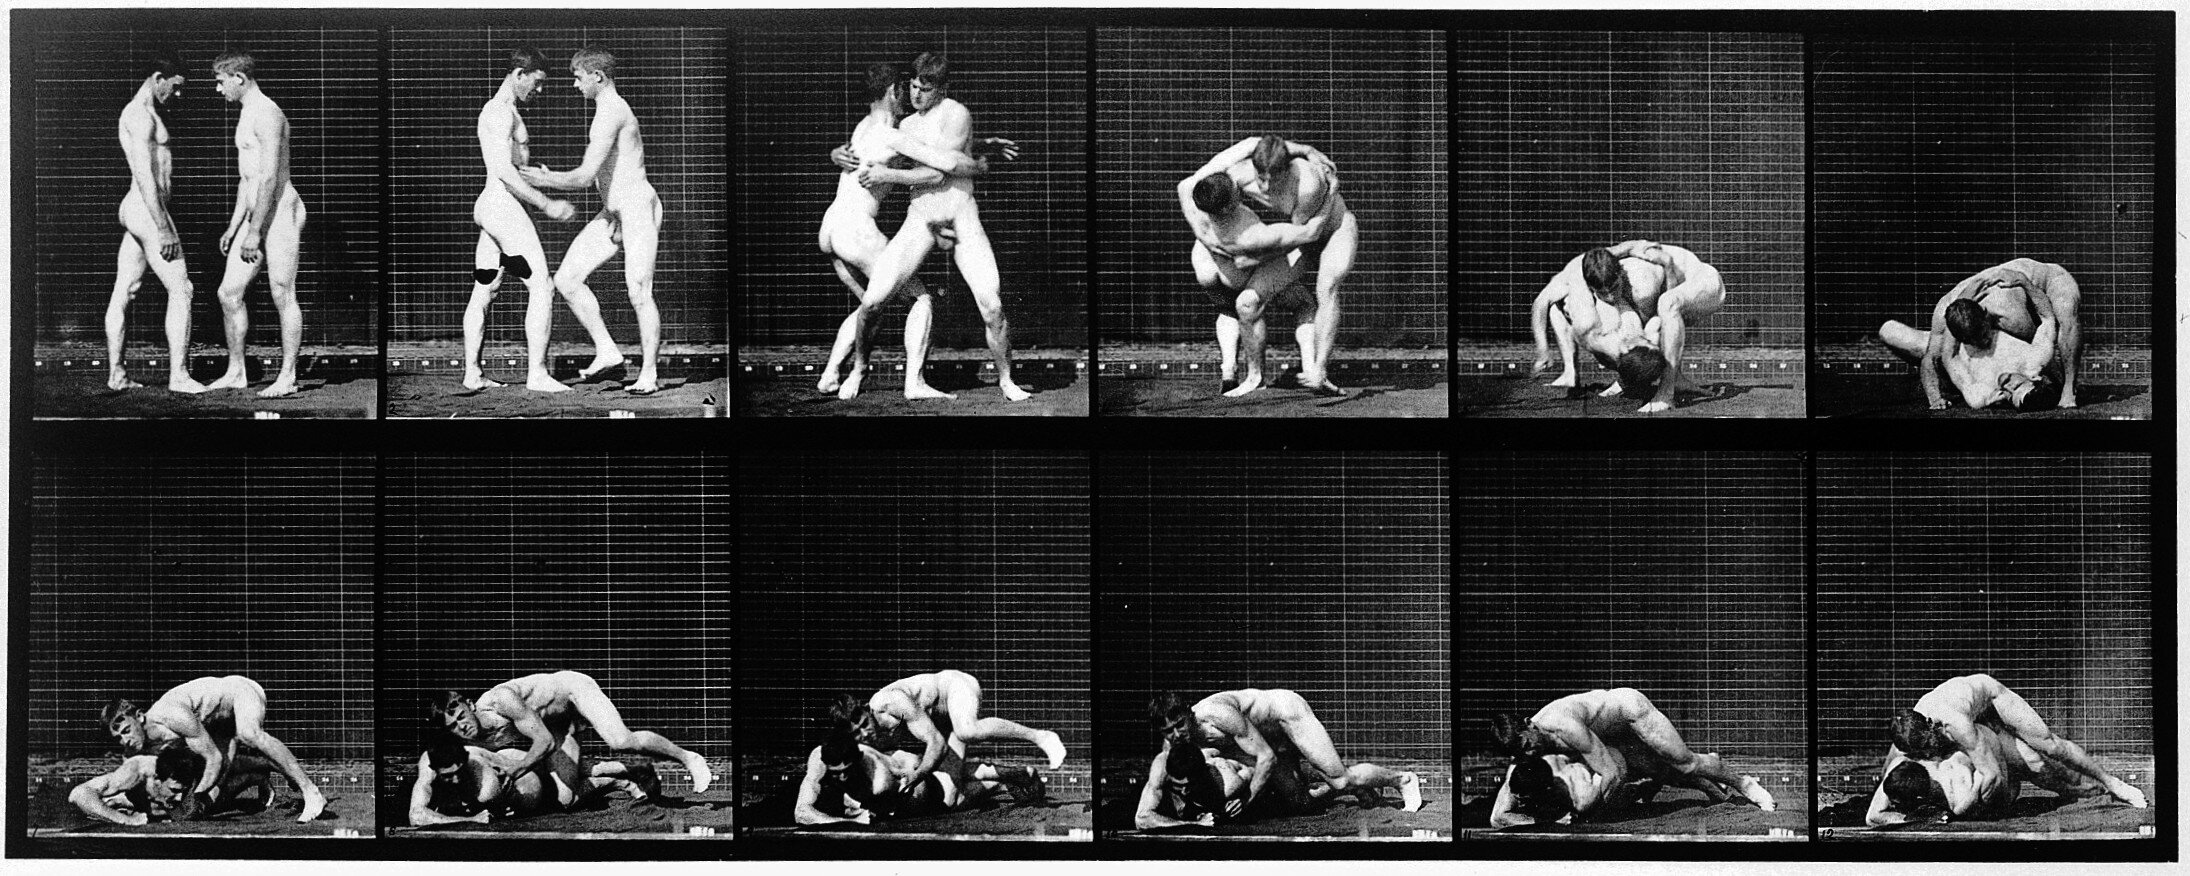 Image: E. Muybridge "Animal locomotion", 1887, Wellcome Collection gallery (2018-03-29), CC-BY-4.0 Photo number: L0018594